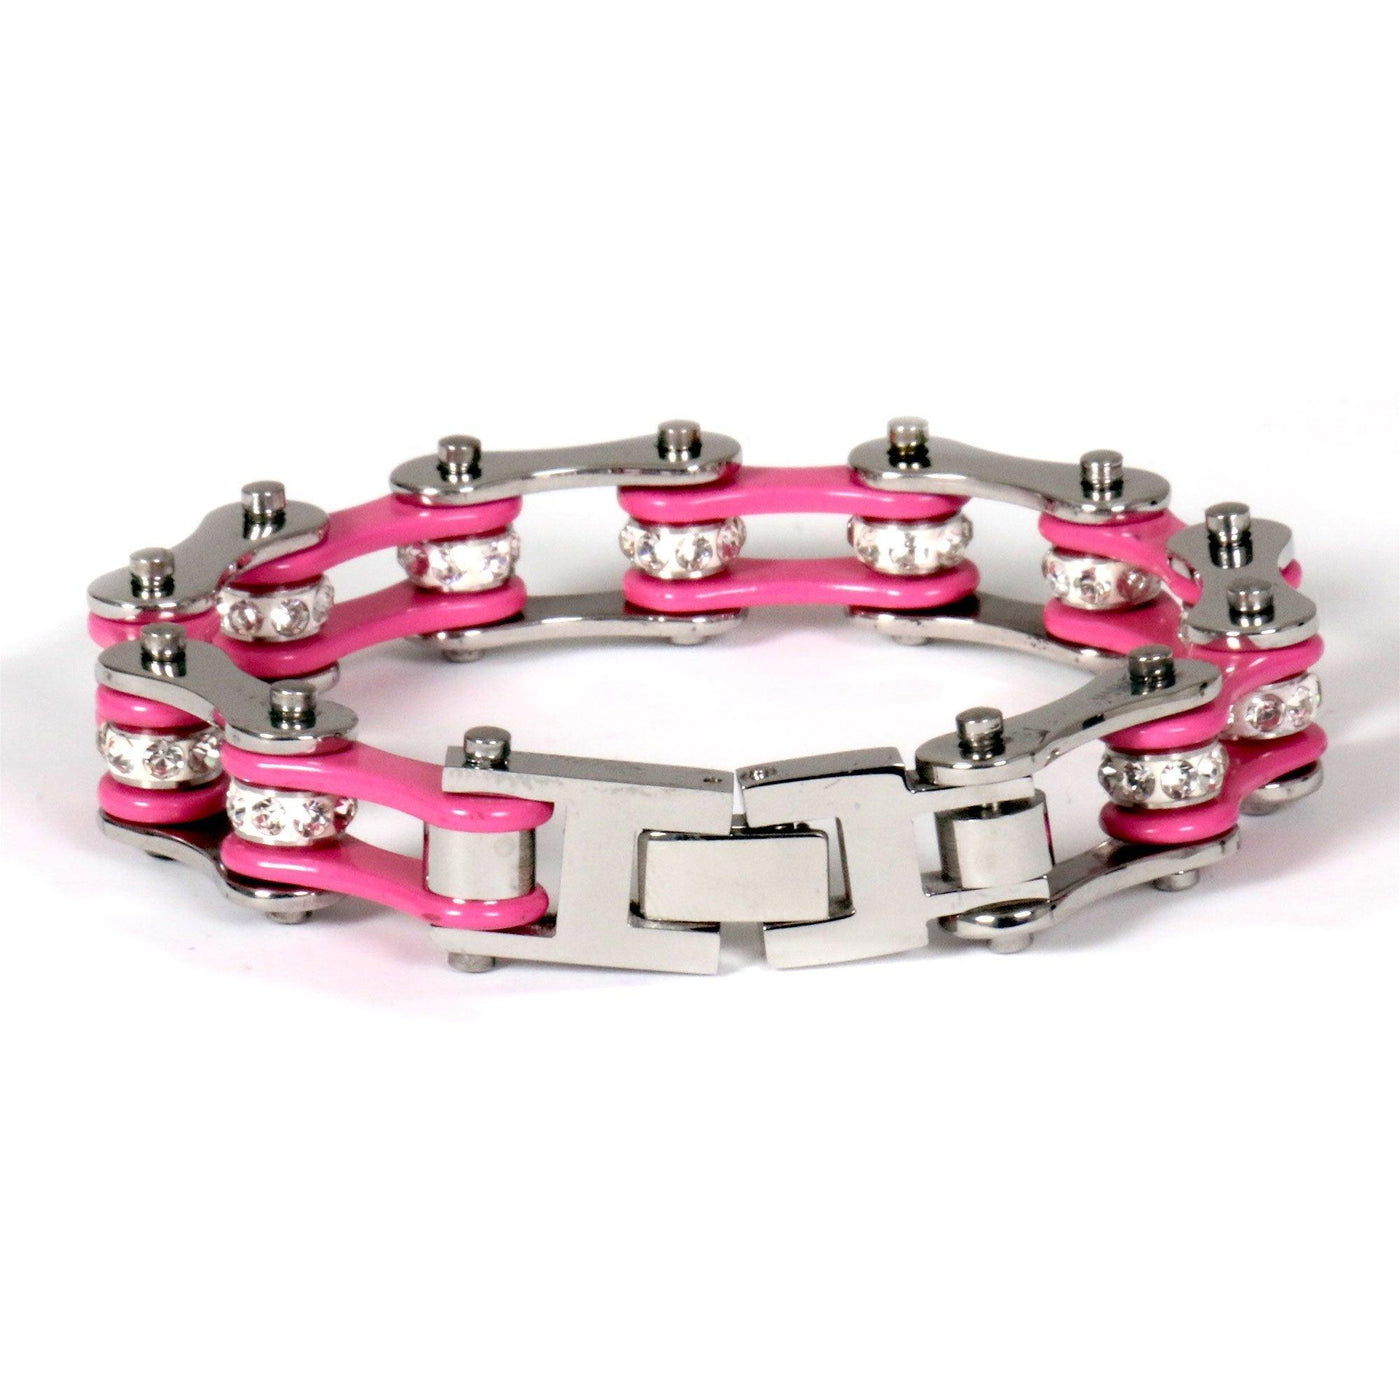 Hot Leathers Pink Motorcycle Chain Bracelets - American Legend Rider